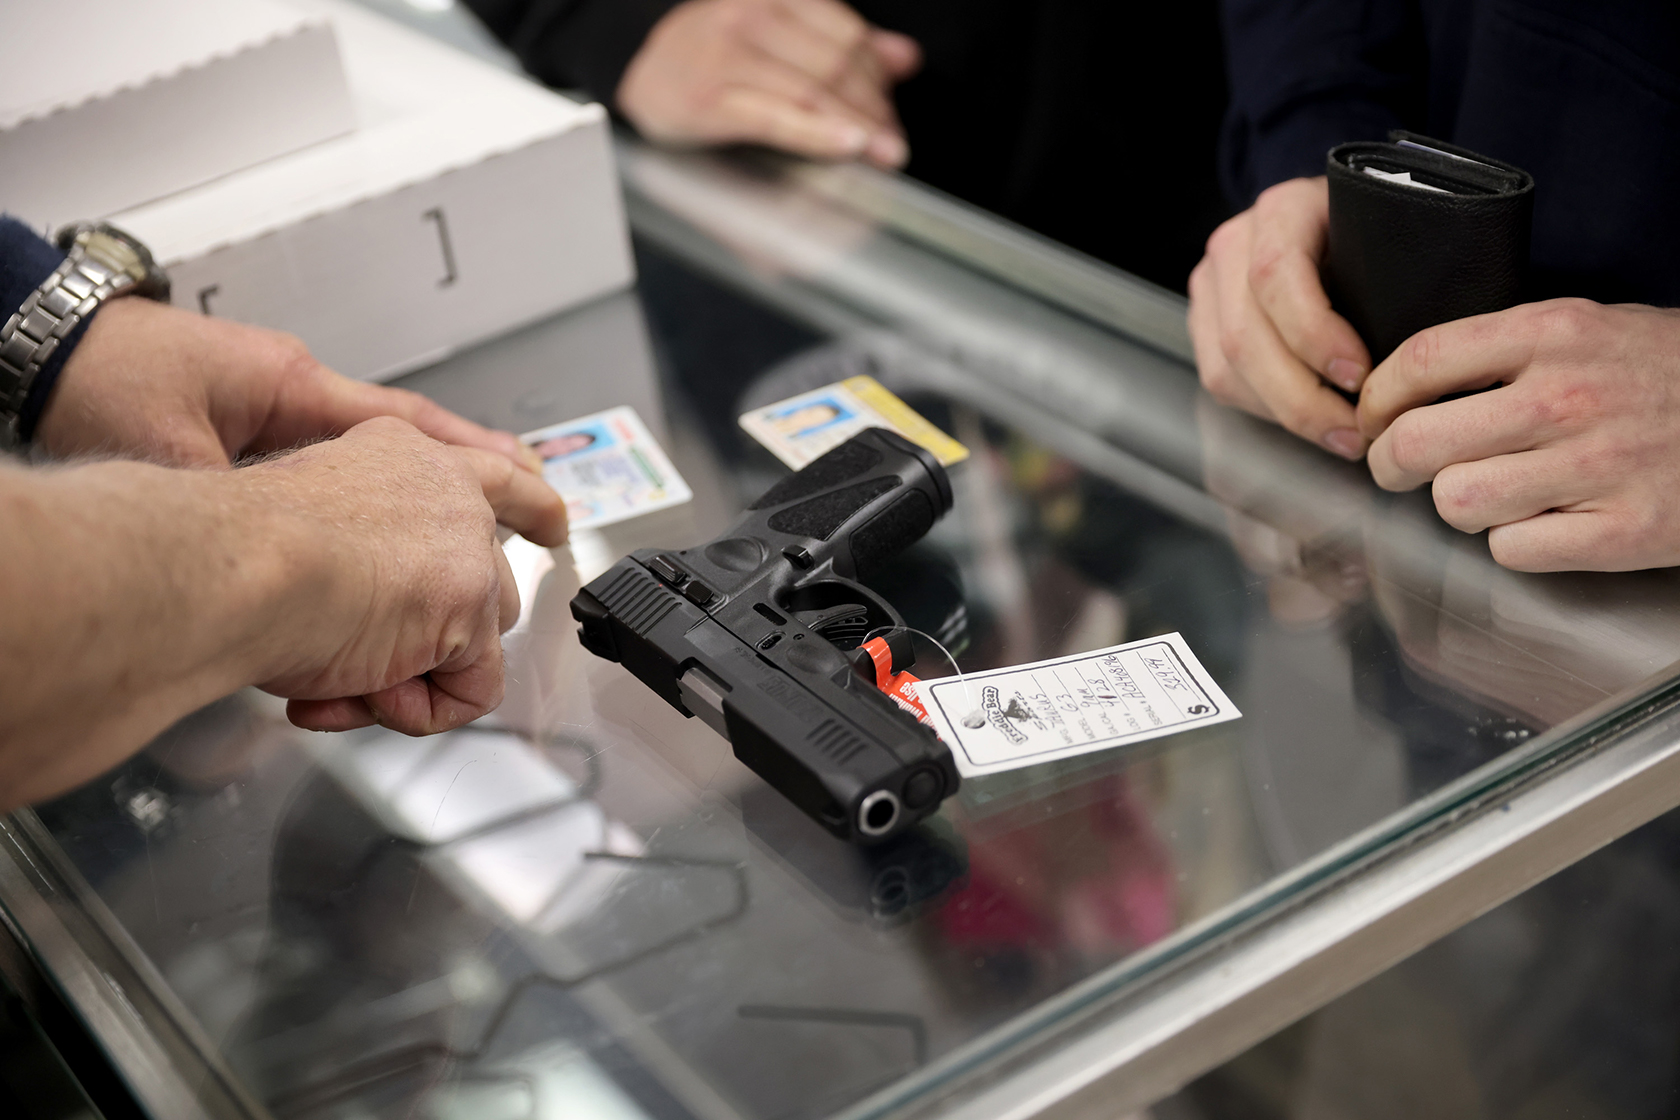 Customer purchases a black gun, passing his ID/driver's license over the glass counter.